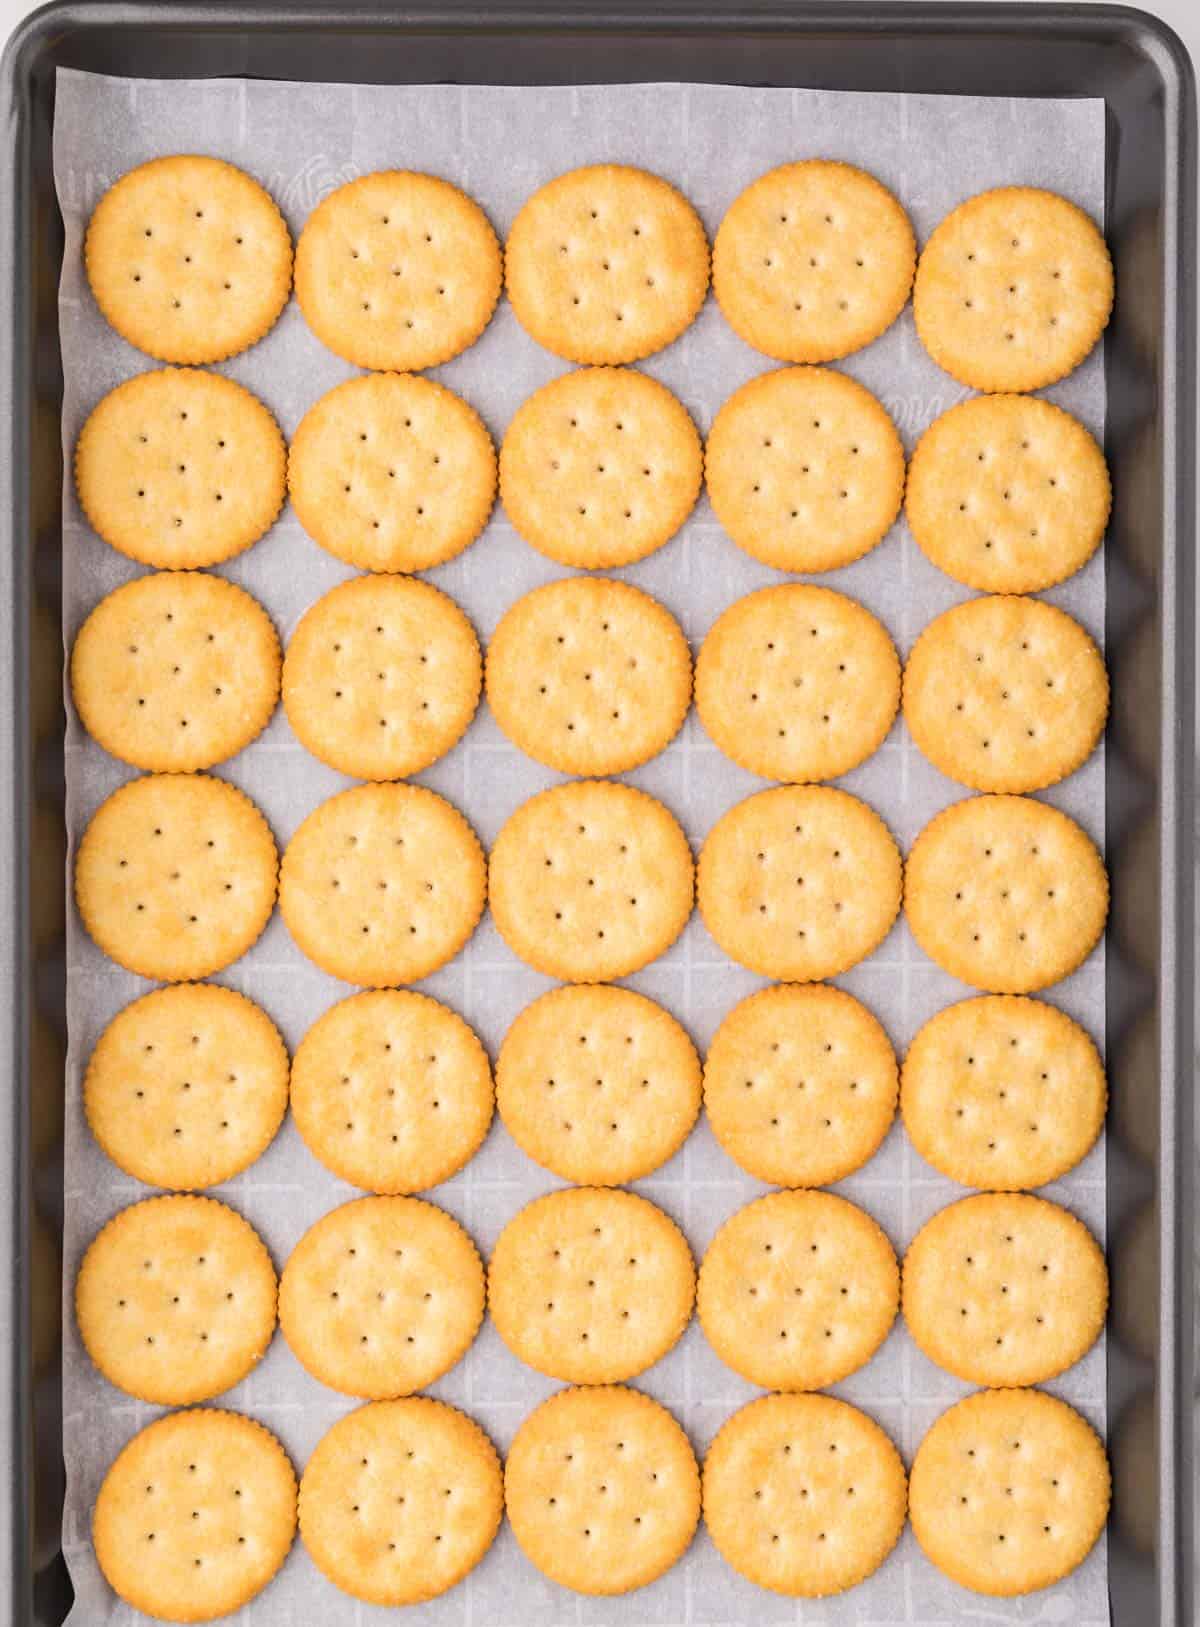 ritz crackers lined up on a baking sheet